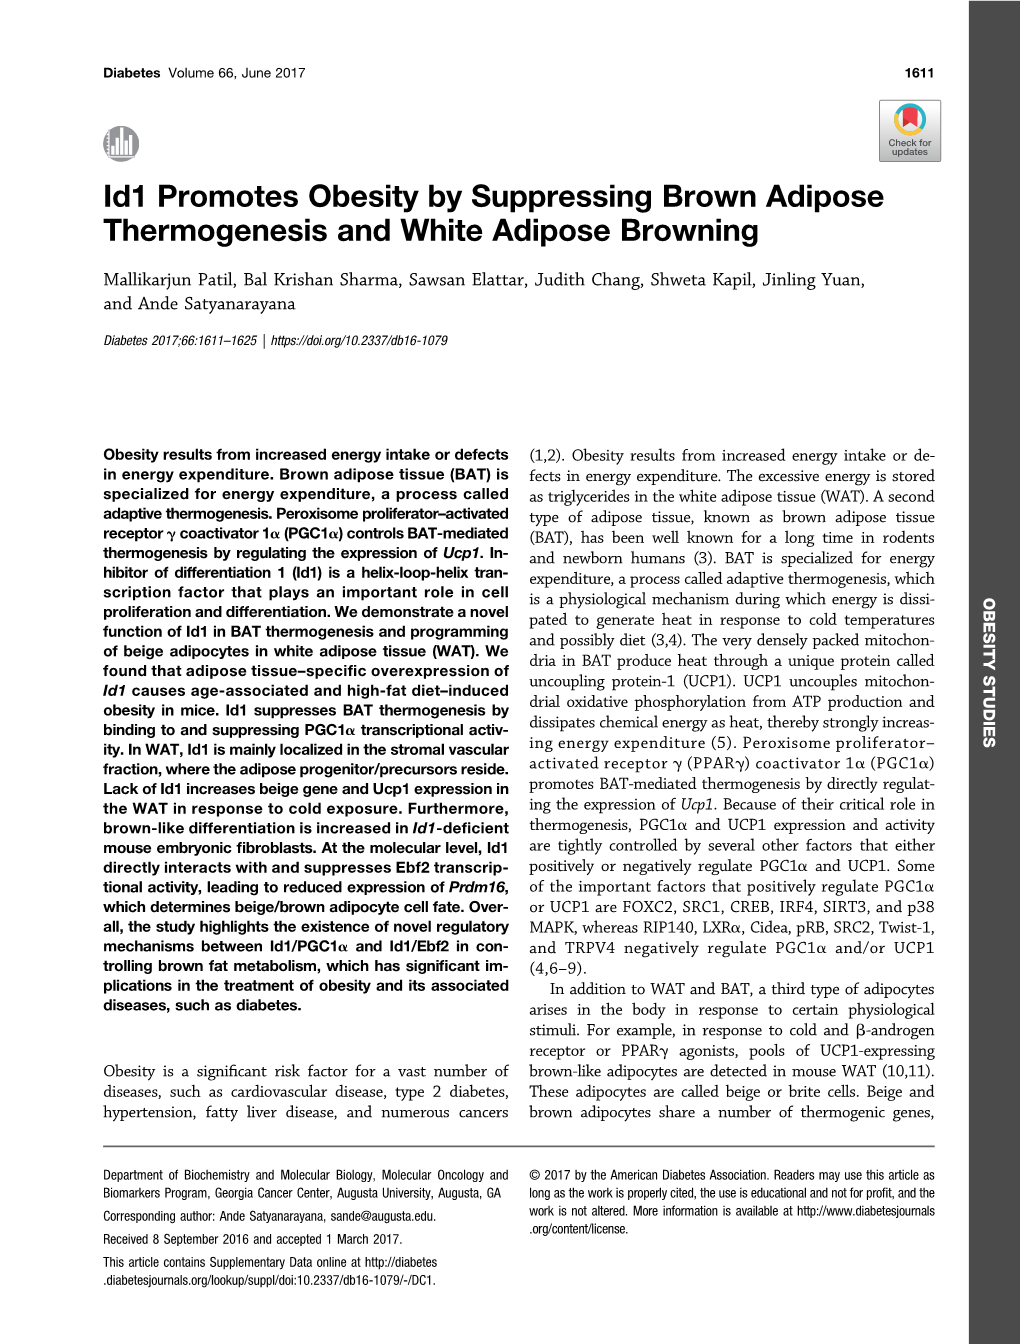 Id1 Promotes Obesity by Suppressing Brown Adipose Thermogenesis and White Adipose Browning